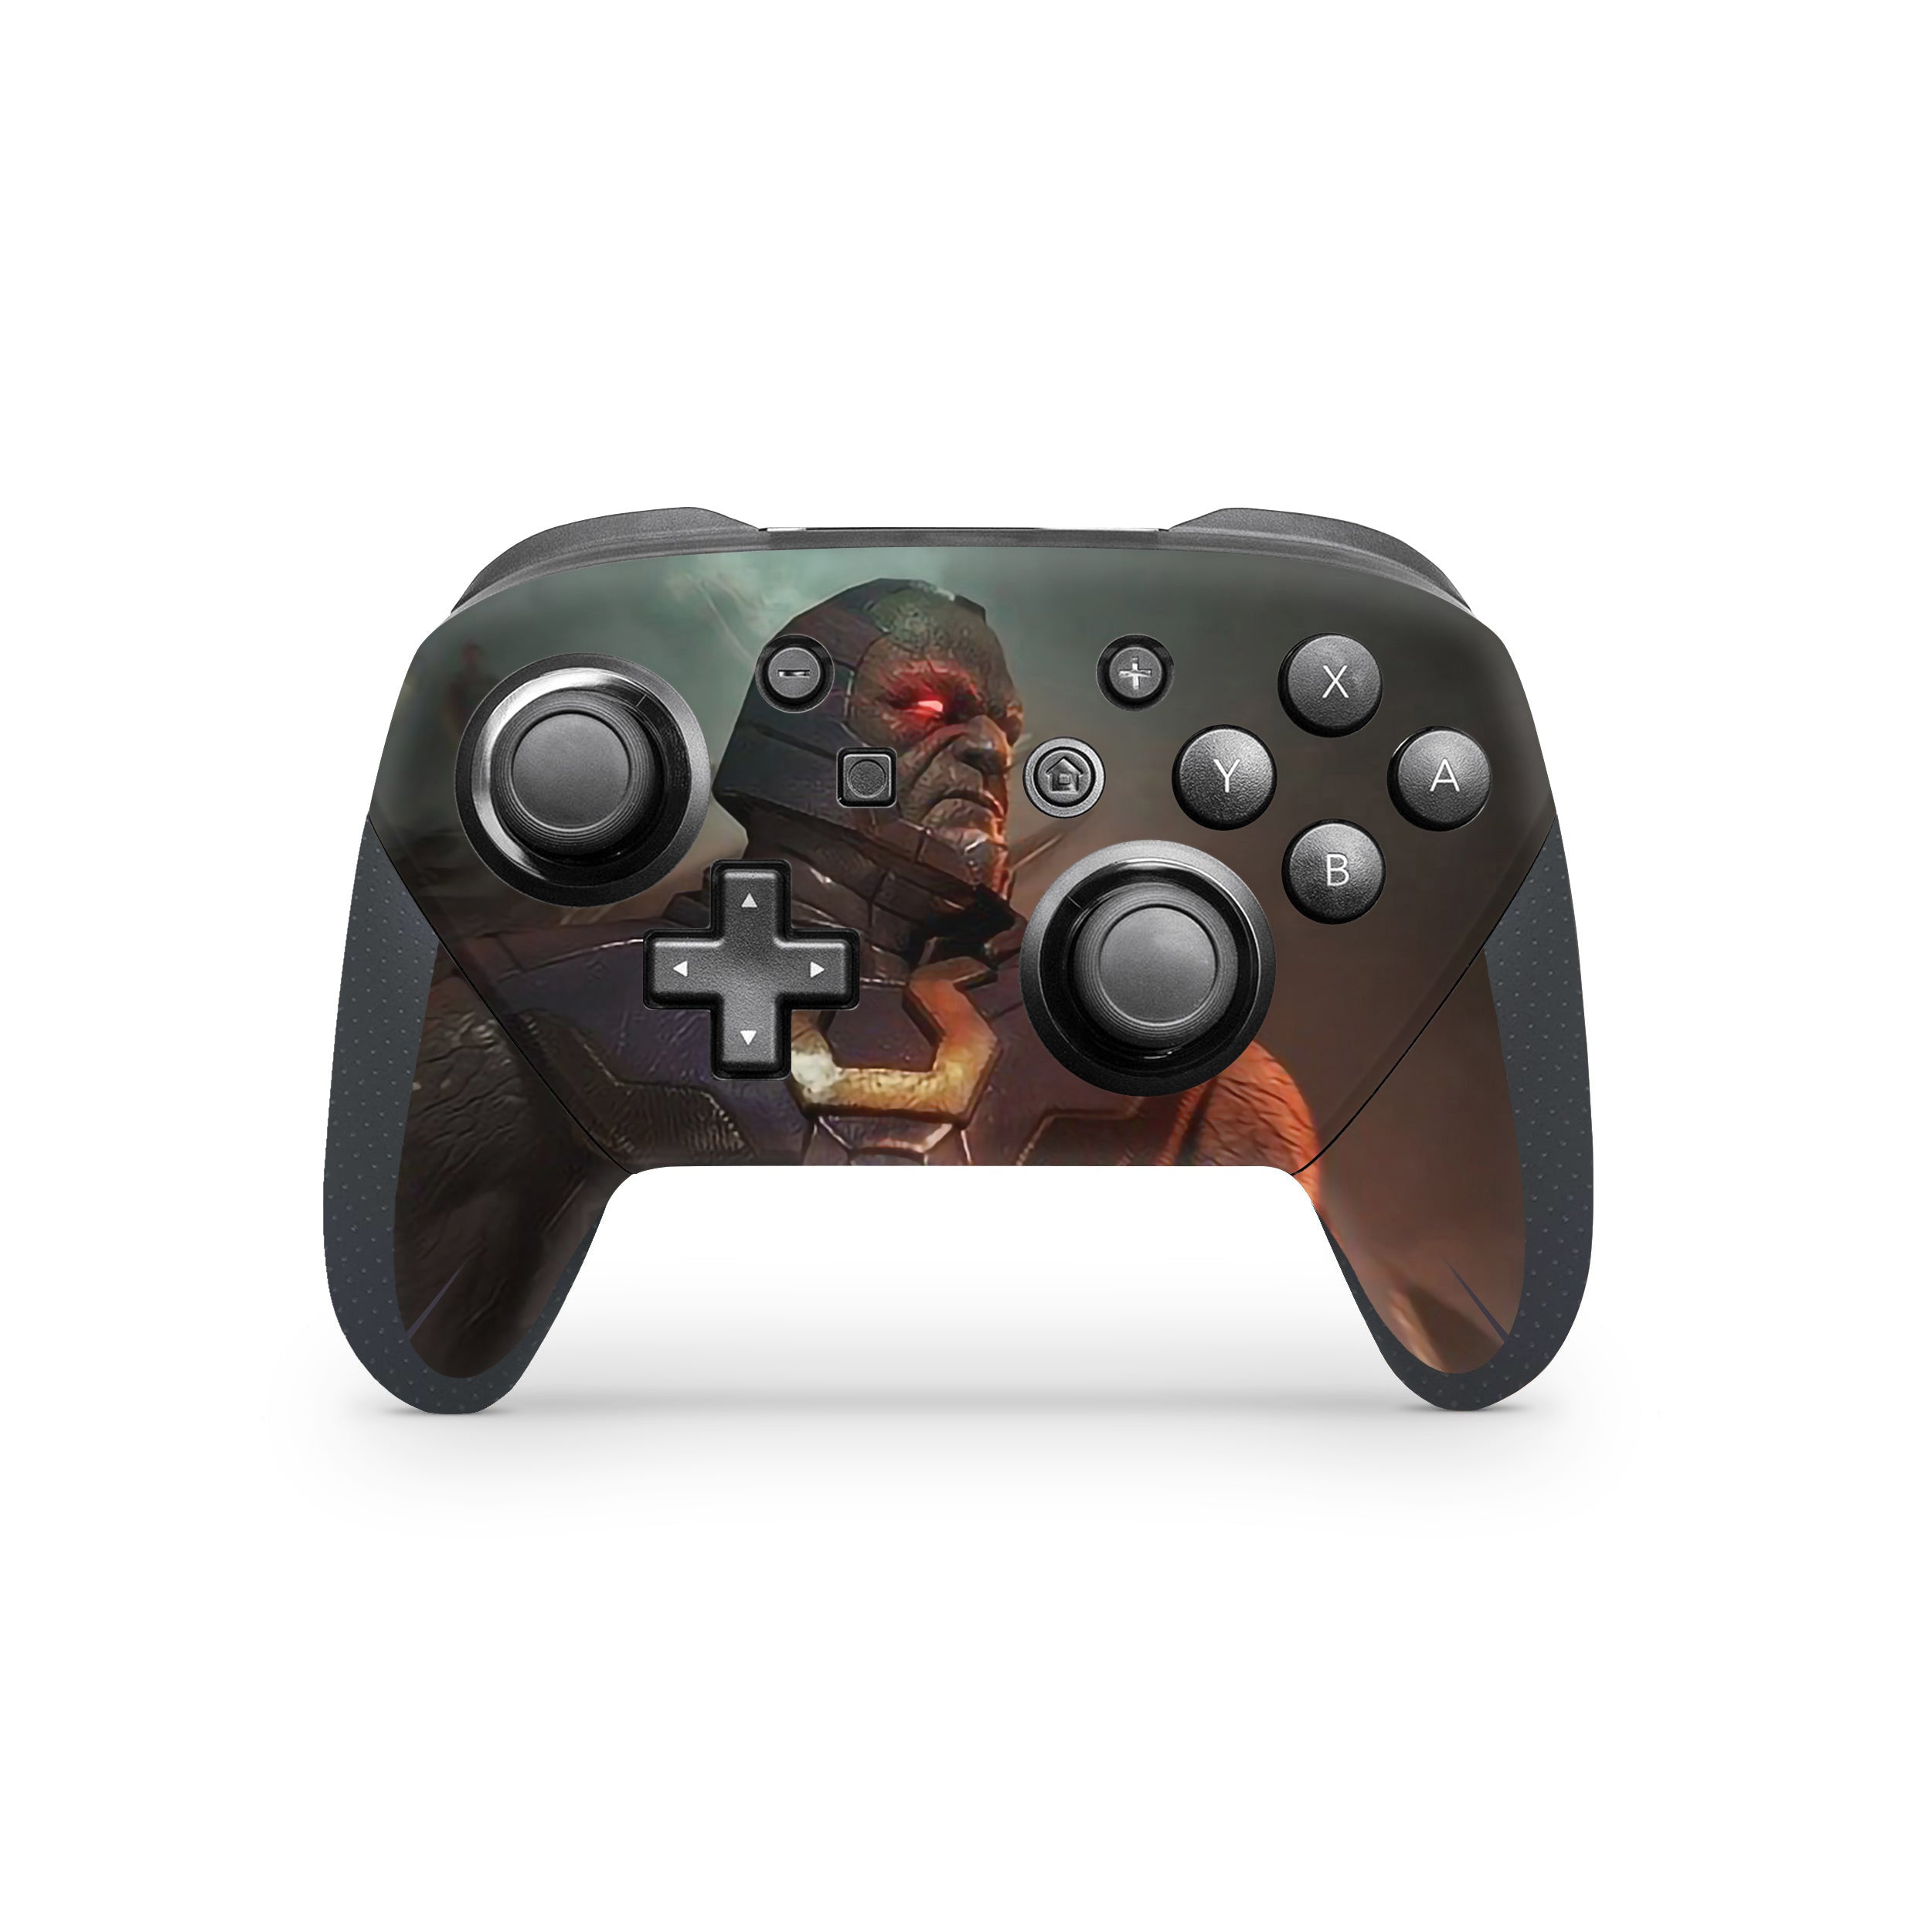 A video game skin featuring a DC Comics Darkseid design for the Switch Pro Controller.